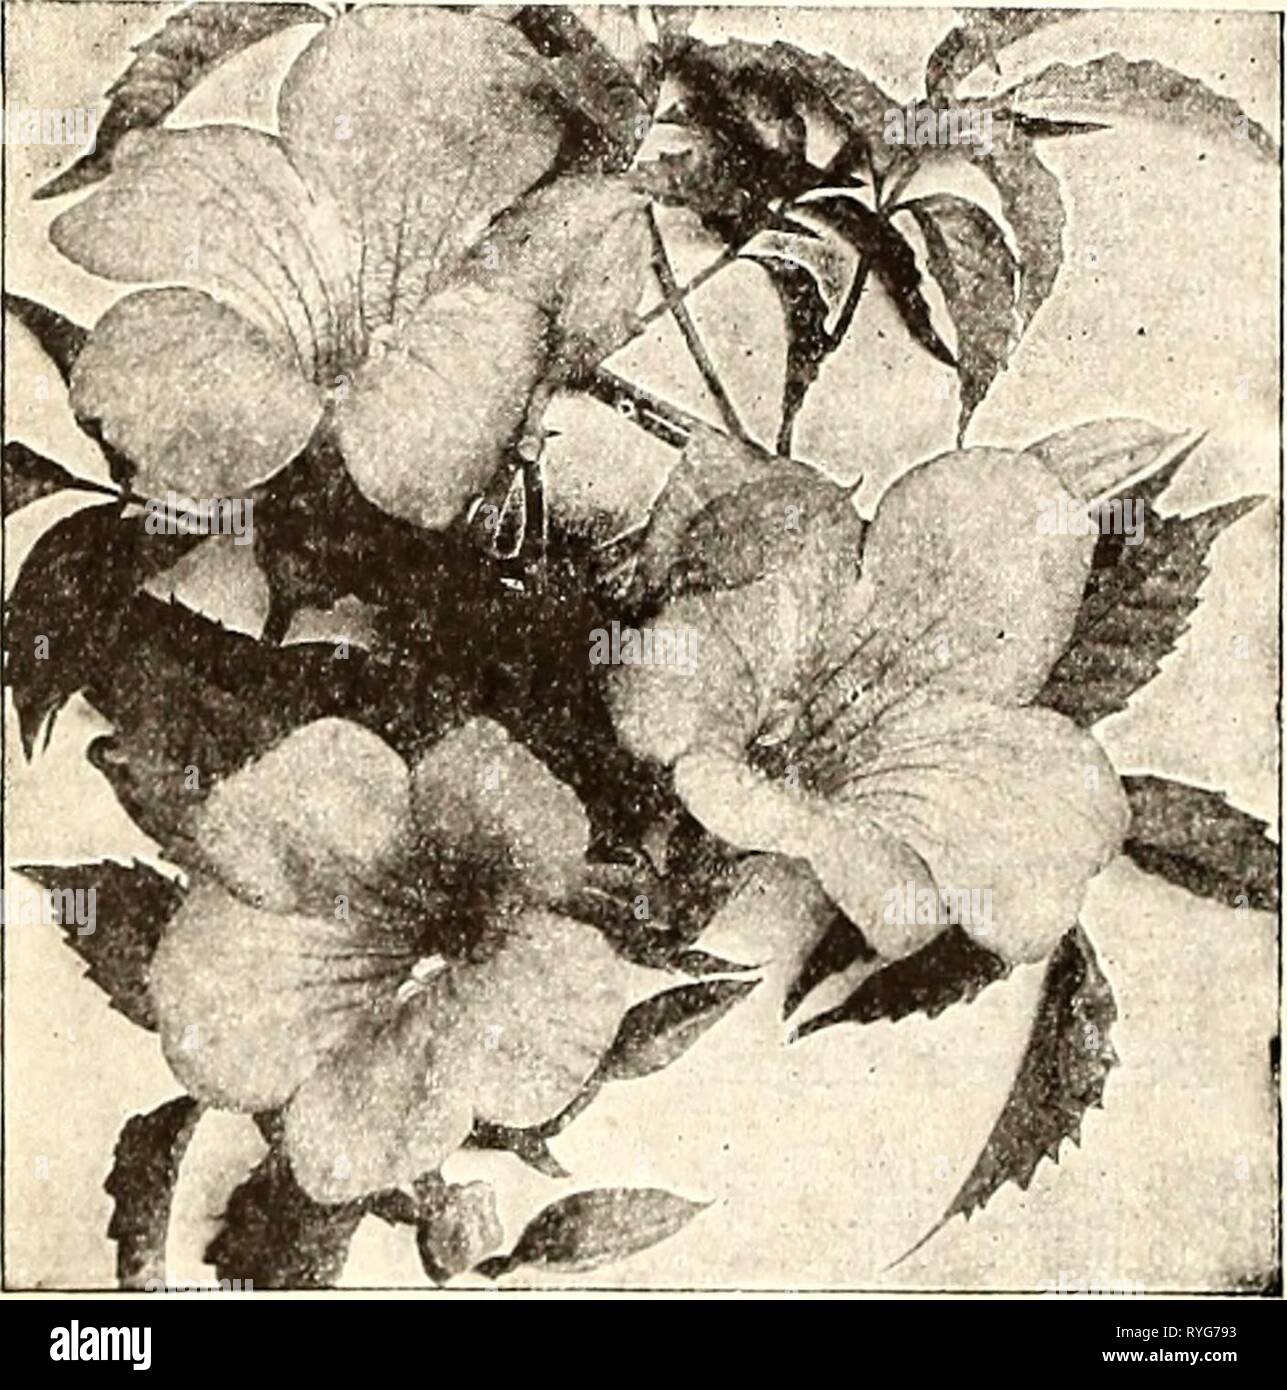 Dreer's wholesale price list for florists  dreerswholesalep1936henr Year: 1936  HENRY A. DREER Dreer's Select WHOLESALE LIST Hardy Vines and Climbers Actinidia—Silver Vine Argruta. Strong two-year-old plants, $4.00 per doz.; $30.00 per 100. Akebia quinata—Akebia Vine Strong two-year-old plants, $2.75 per doz.; $18.00 per 100. Ampelopsis Engelmanni Strong two-year-old plants of this most useful va- riety. $2.75 per doz,; $18.00 per 100. Ampelopsis Lowi The miniature-leaved form of Ampelopsis Veltchi. 3-inch pots, $4.00 per doz.; $30.00 per 100. Ampelopsis quinquefolia Virginia Creeper, American Stock Photo